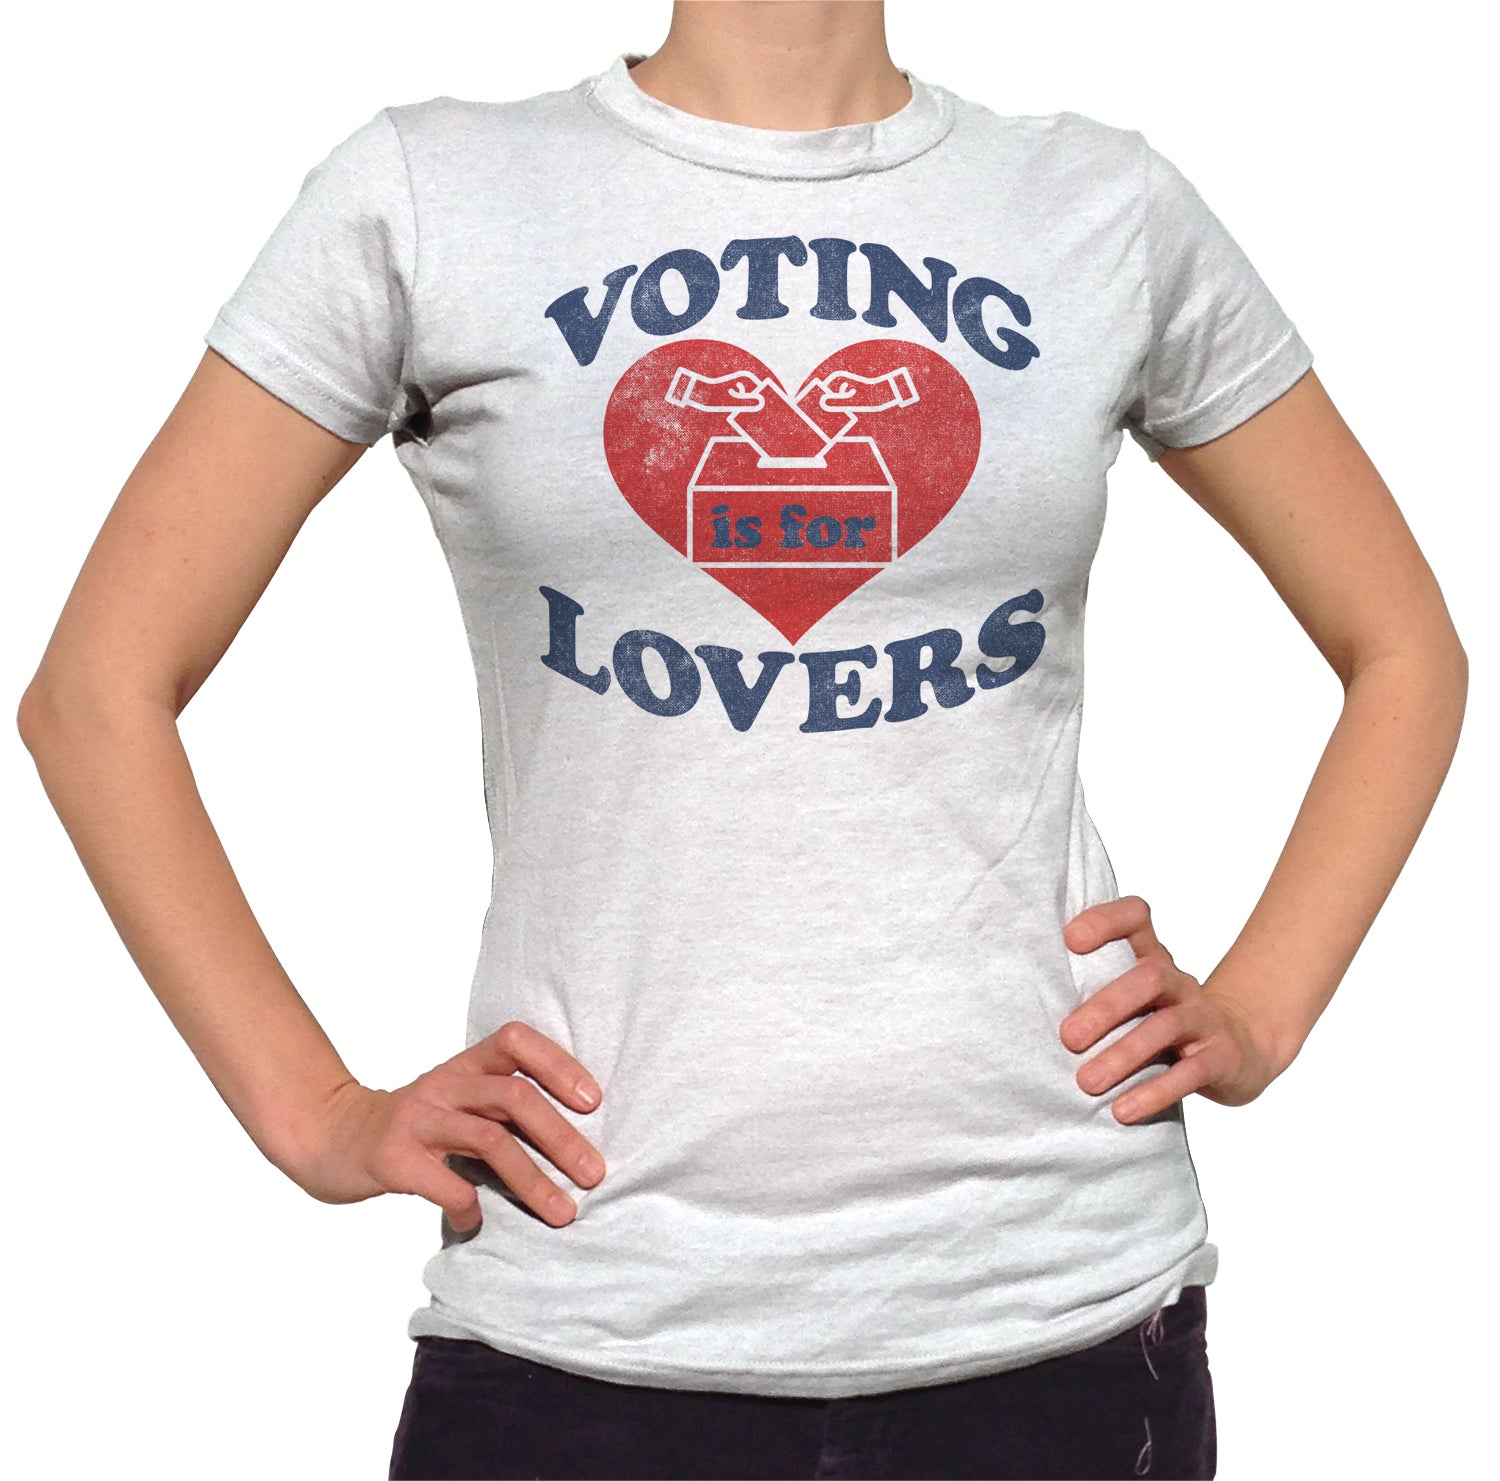 Women's Voting Is For Lovers T-Shirt